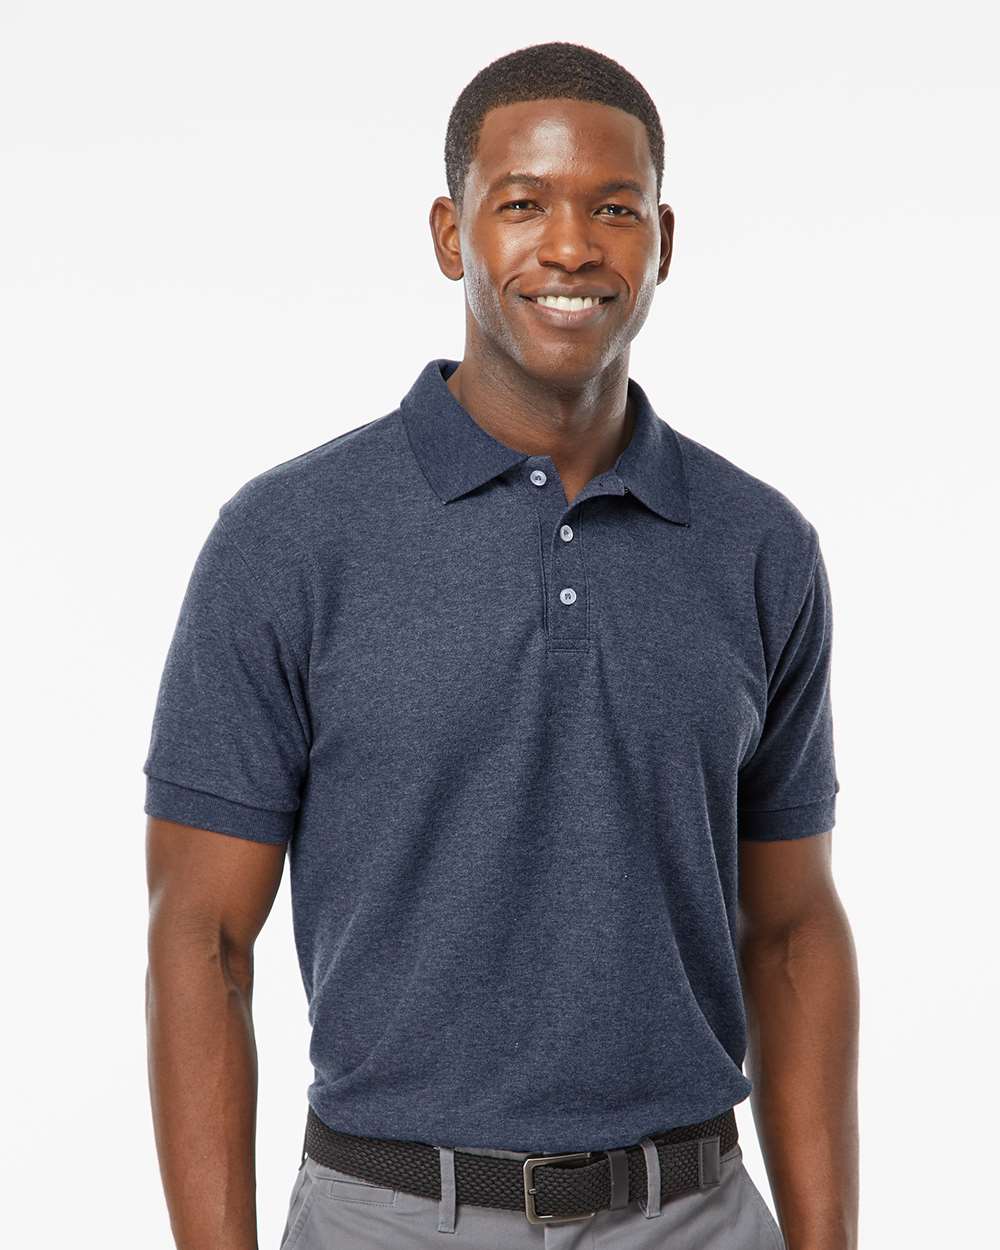 M&O Soft Touch Polo #7006 Navy Heather